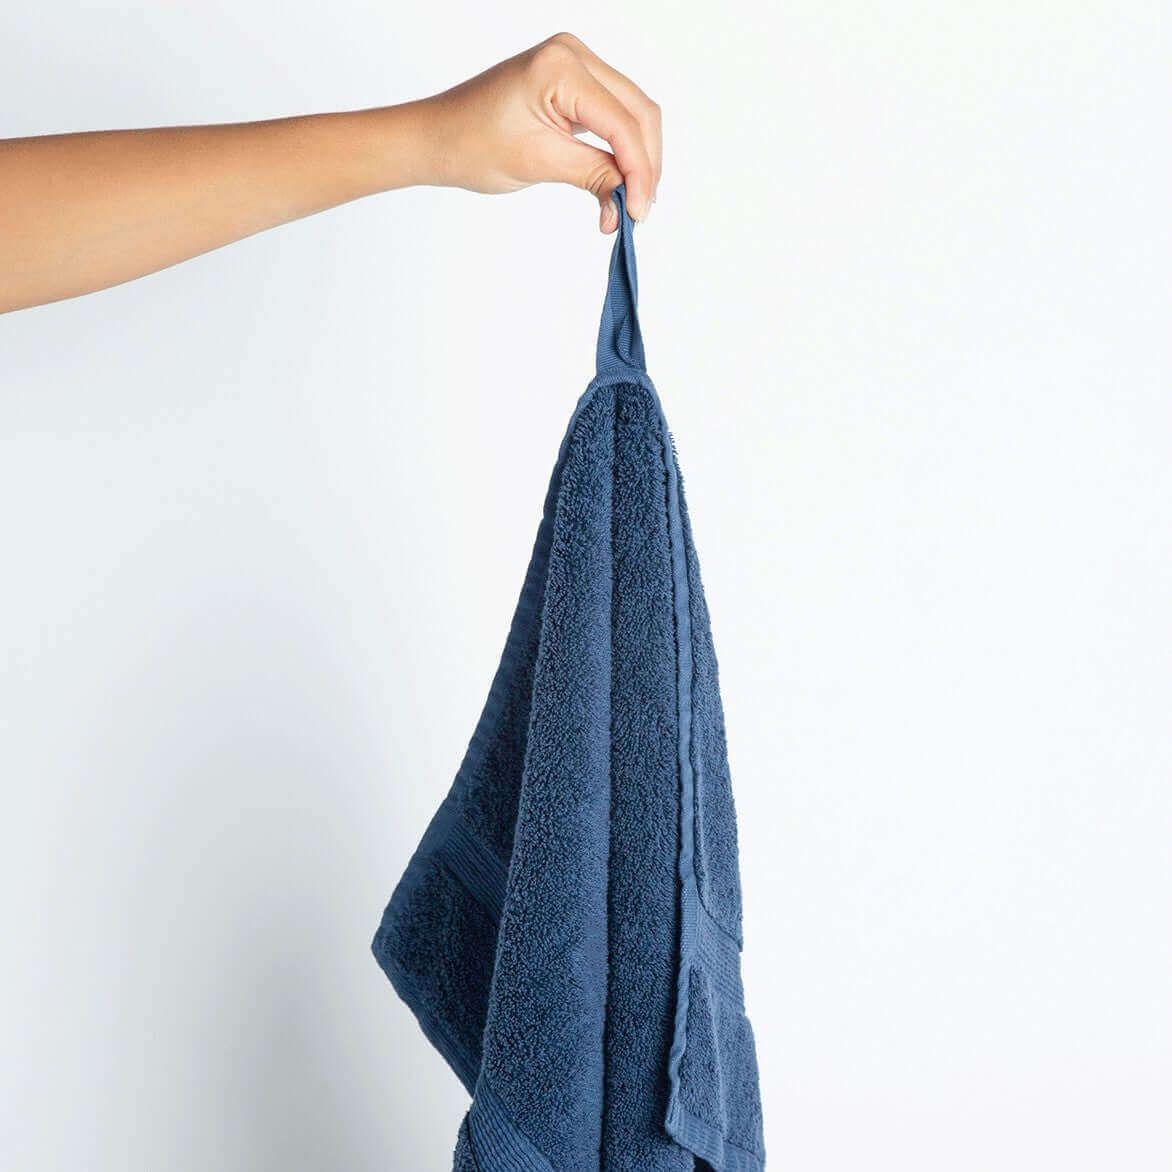 Nebia Hand Towel - front view of hand holding towel in color navy